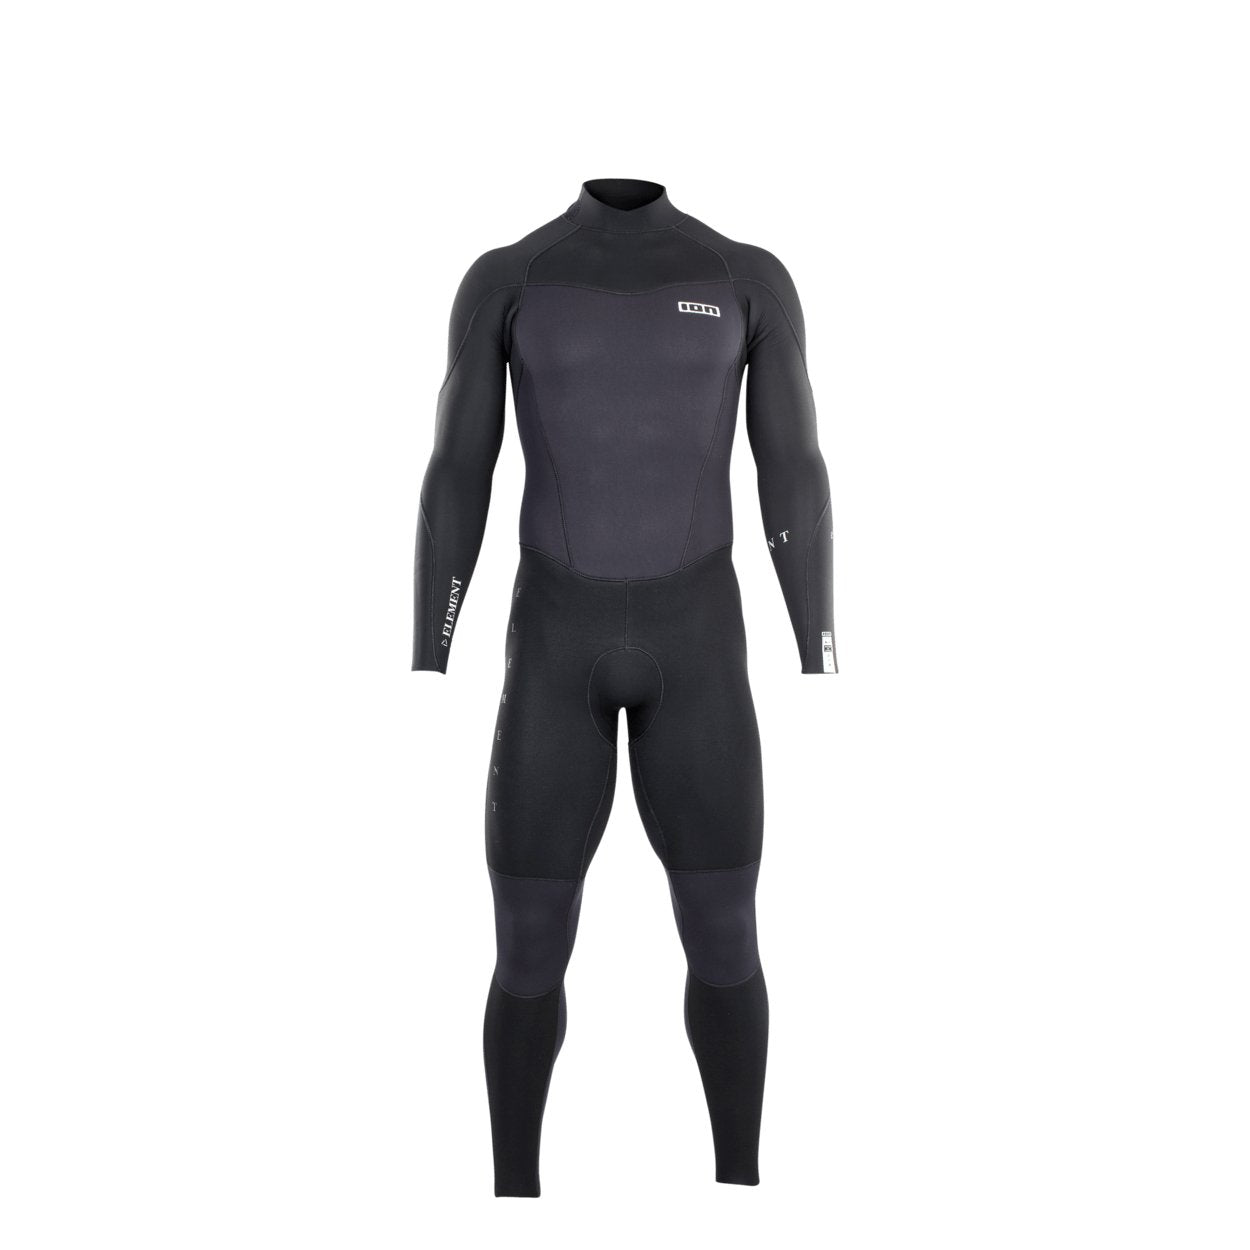 ION Element 5/4 Back Zip 2022 - Worthing Watersports - 9008415948802 - Wetsuits - ION Water